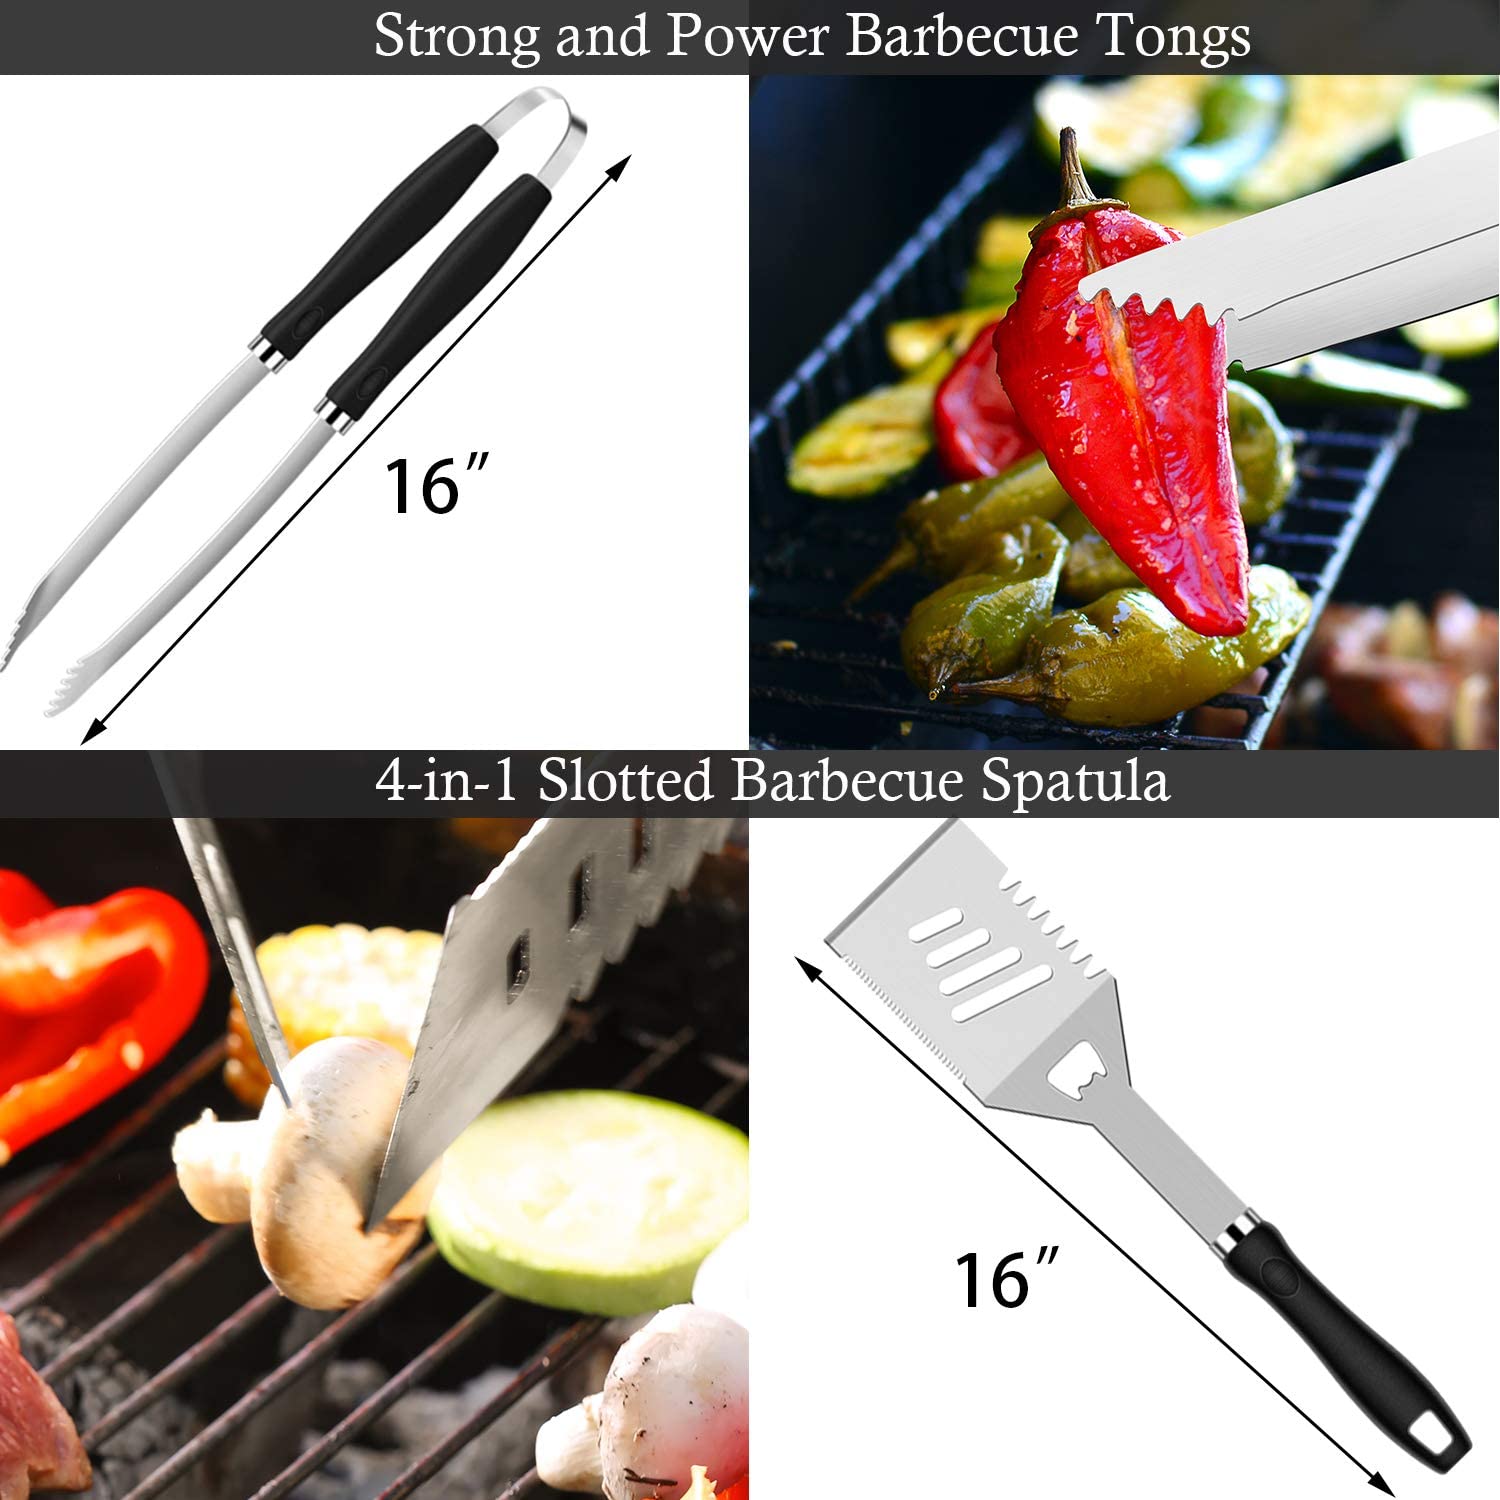 A collage of 4 images. Two of the images show 2 bbq tools and the other two images show the tools in use picking up food off a grill.